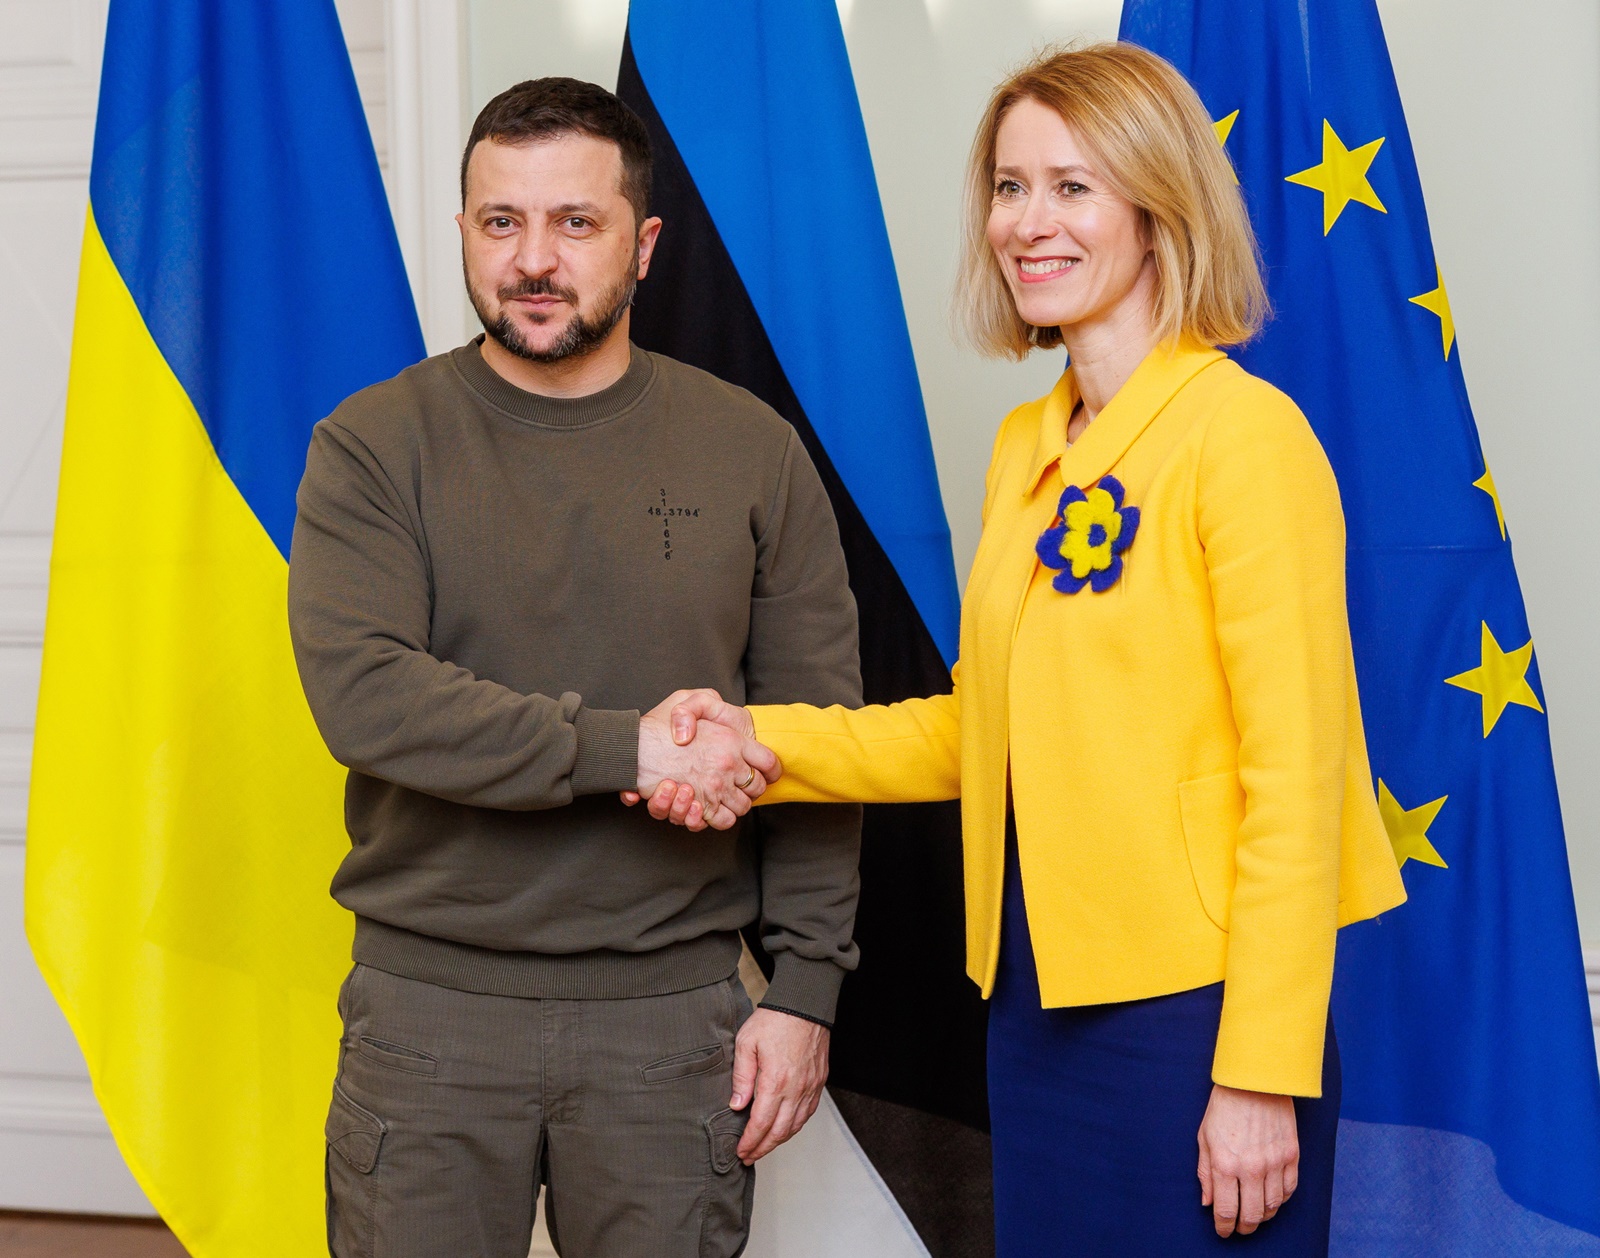 epa11069238 A handout photo made available by the government office of Estonia shows Estonian Prime Minister Kaja Kallas (R) and Ukrainian President Volodymyr Zelensky during their meeting in Tallinn, Estonia, 11 January 2024. Zelensky has made visits to Lithuania, Estonia and Latvia where he met with top officials to discuss support for Ukraine amid the Russian invasion as well as Ukrainian 'integration into the EU and NATO' and security.  EPA/RAUL MEE HANDOUT   HANDOUT EDITORIAL USE ONLY/NO SALES HANDOUT EDITORIAL USE ONLY/NO SALES